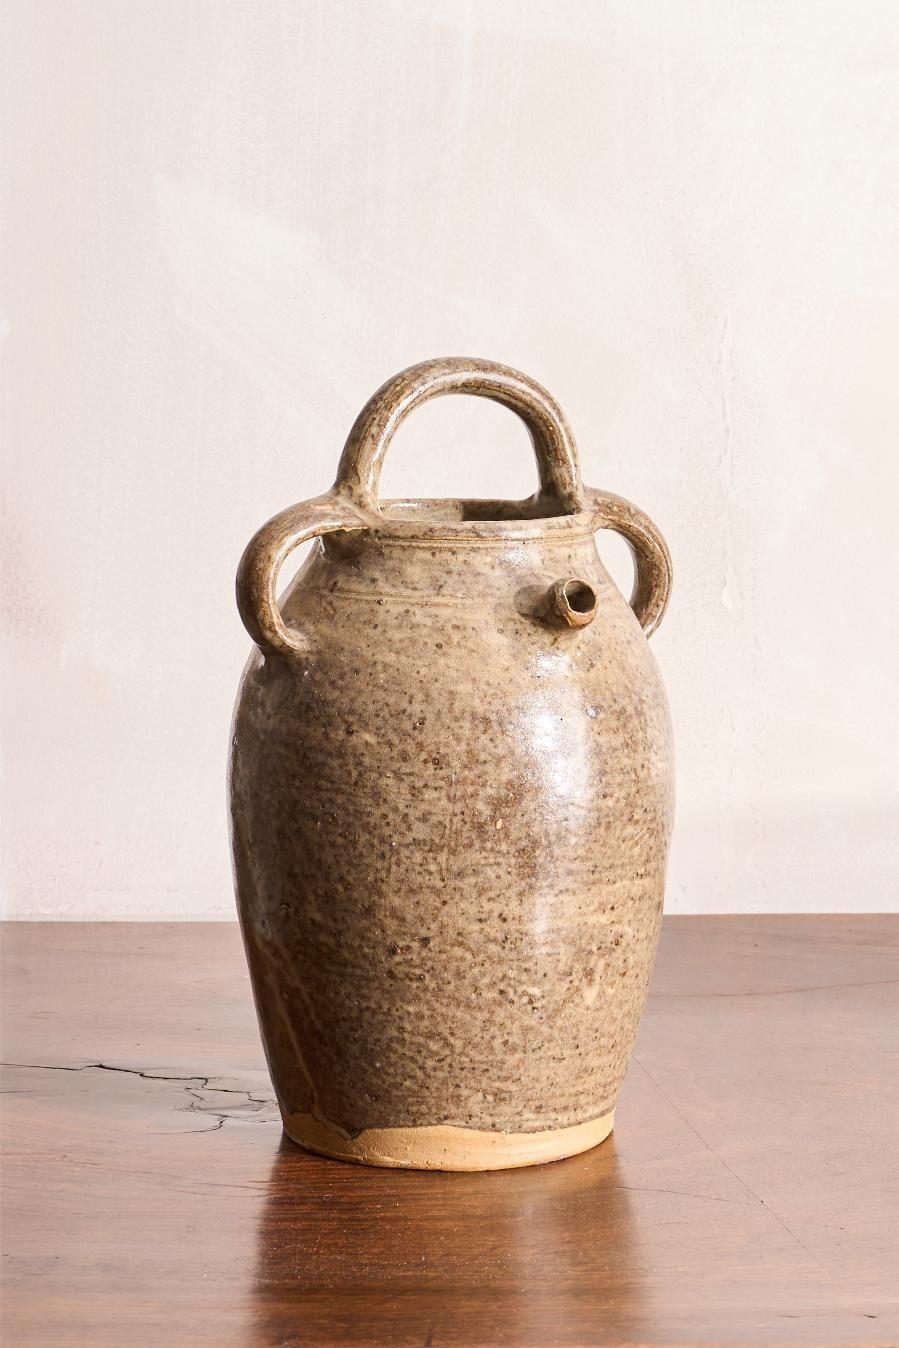 This is a very attractive genuine antique French country pot. Ideal as a decorative piece to add some colour to a space. The glaze on this one is lovely mottled grey and with some simple dried flowers in creates an attractive feature piece. Lovely